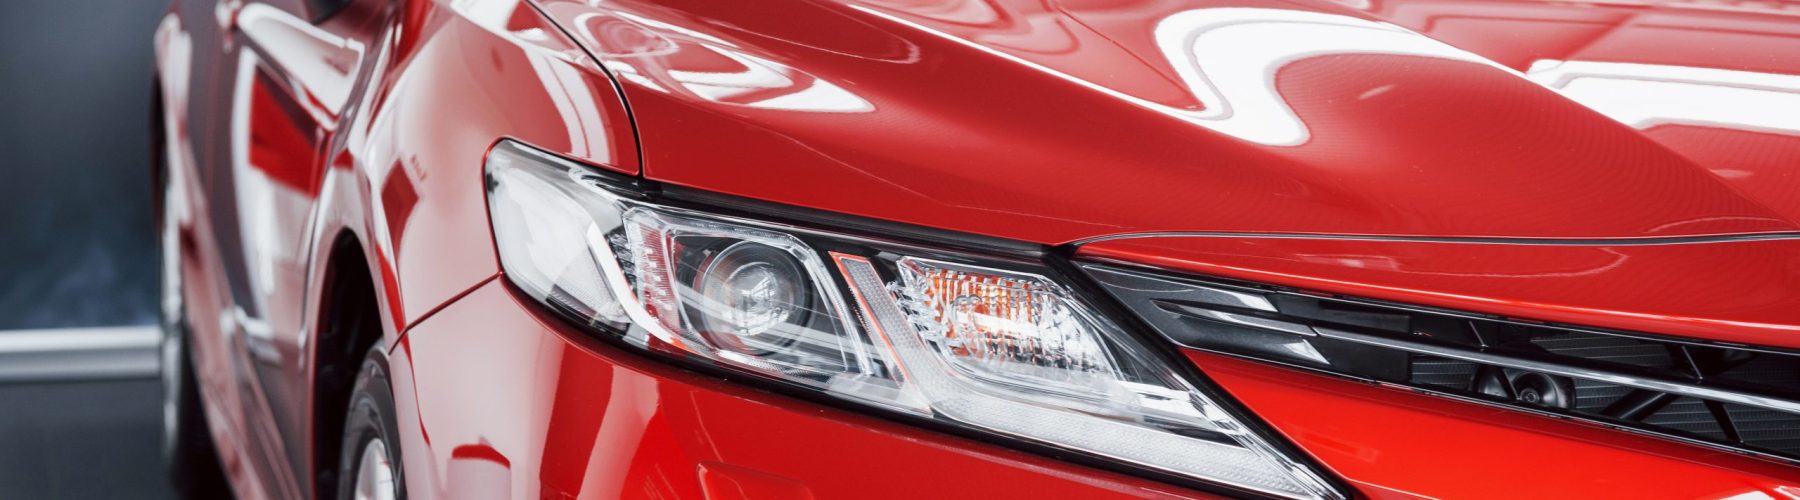 Headlights of the new red car, in the car dealership